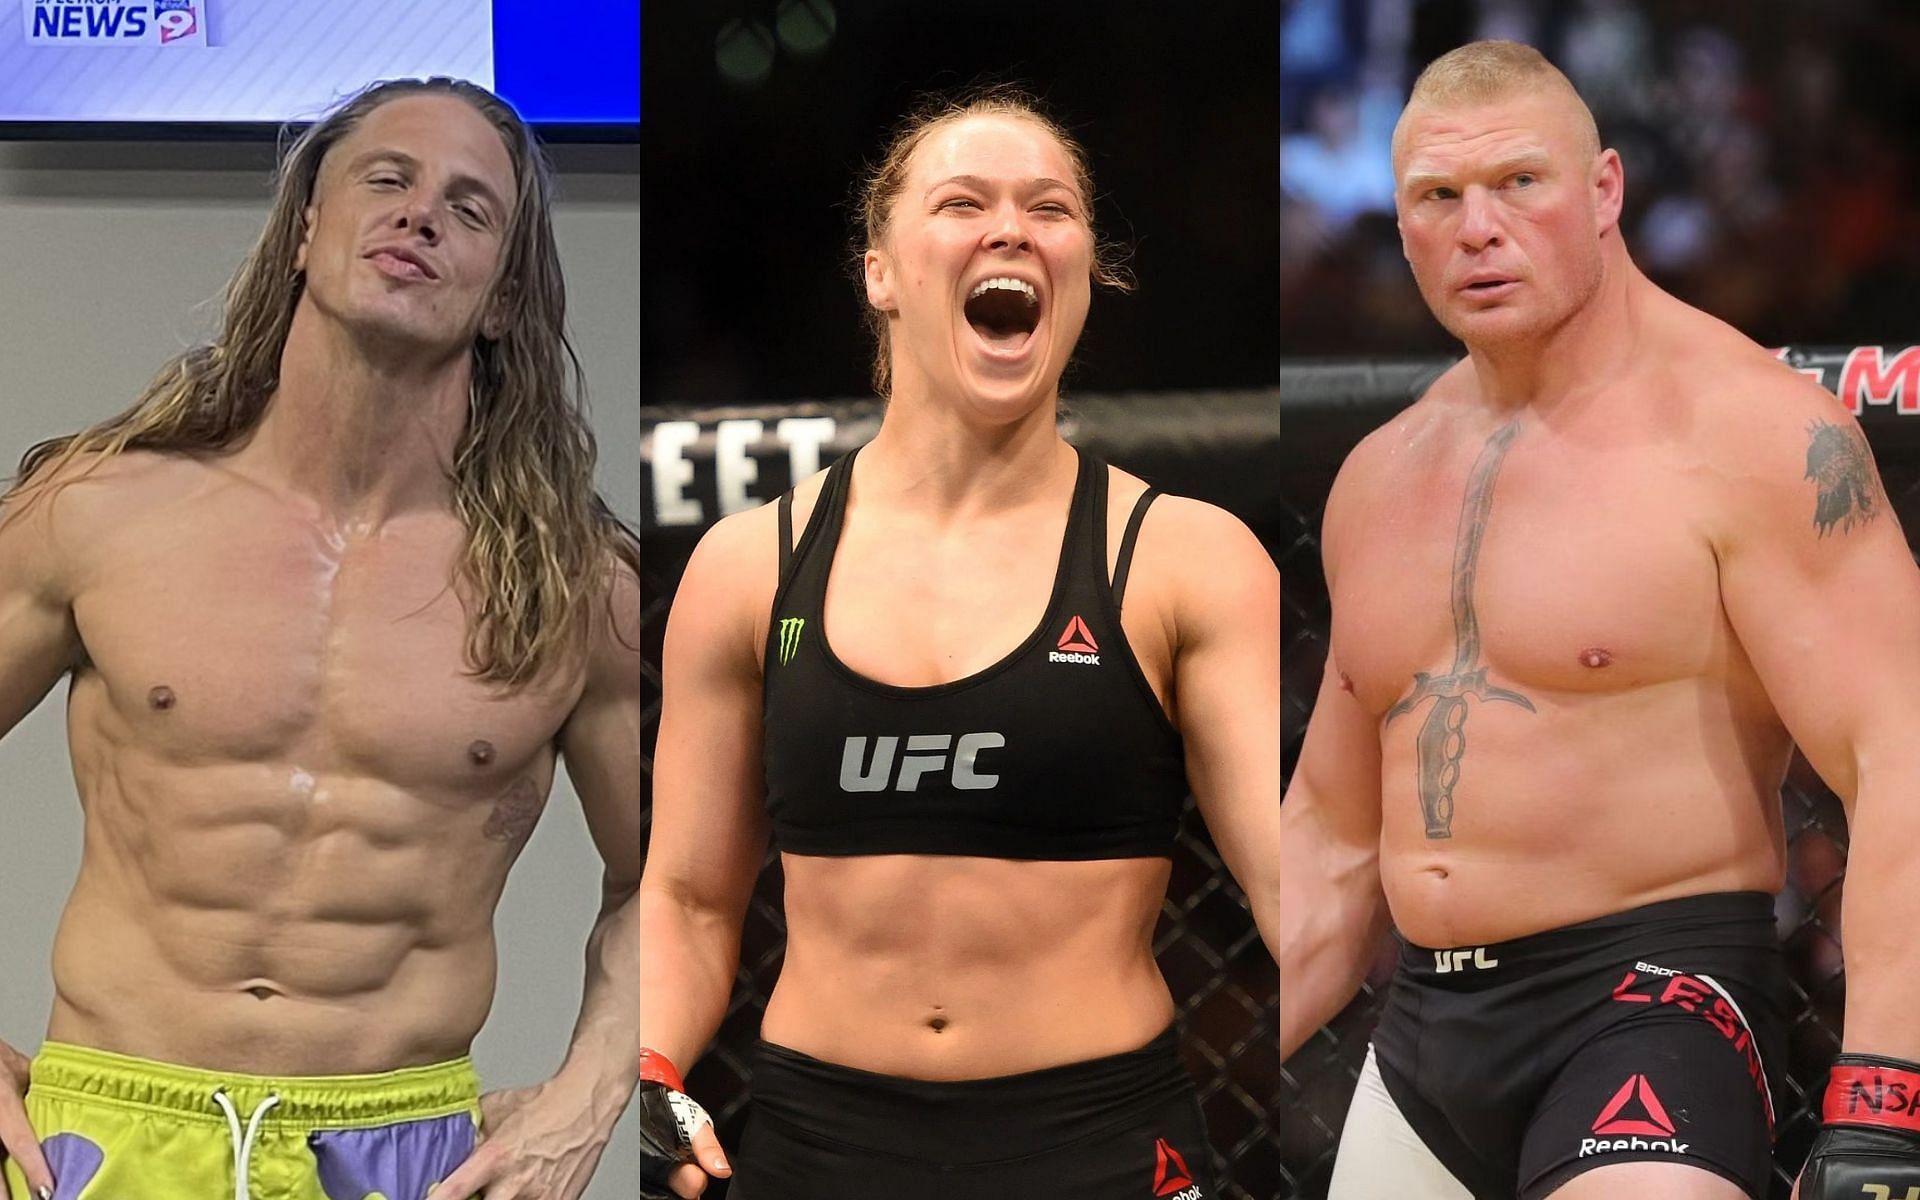 Matt Riddle (left), Ronda Rousey (centre), Brock Lesnar (right) [Image Credit: Getty and Twitter.com/SuperKingofBros]